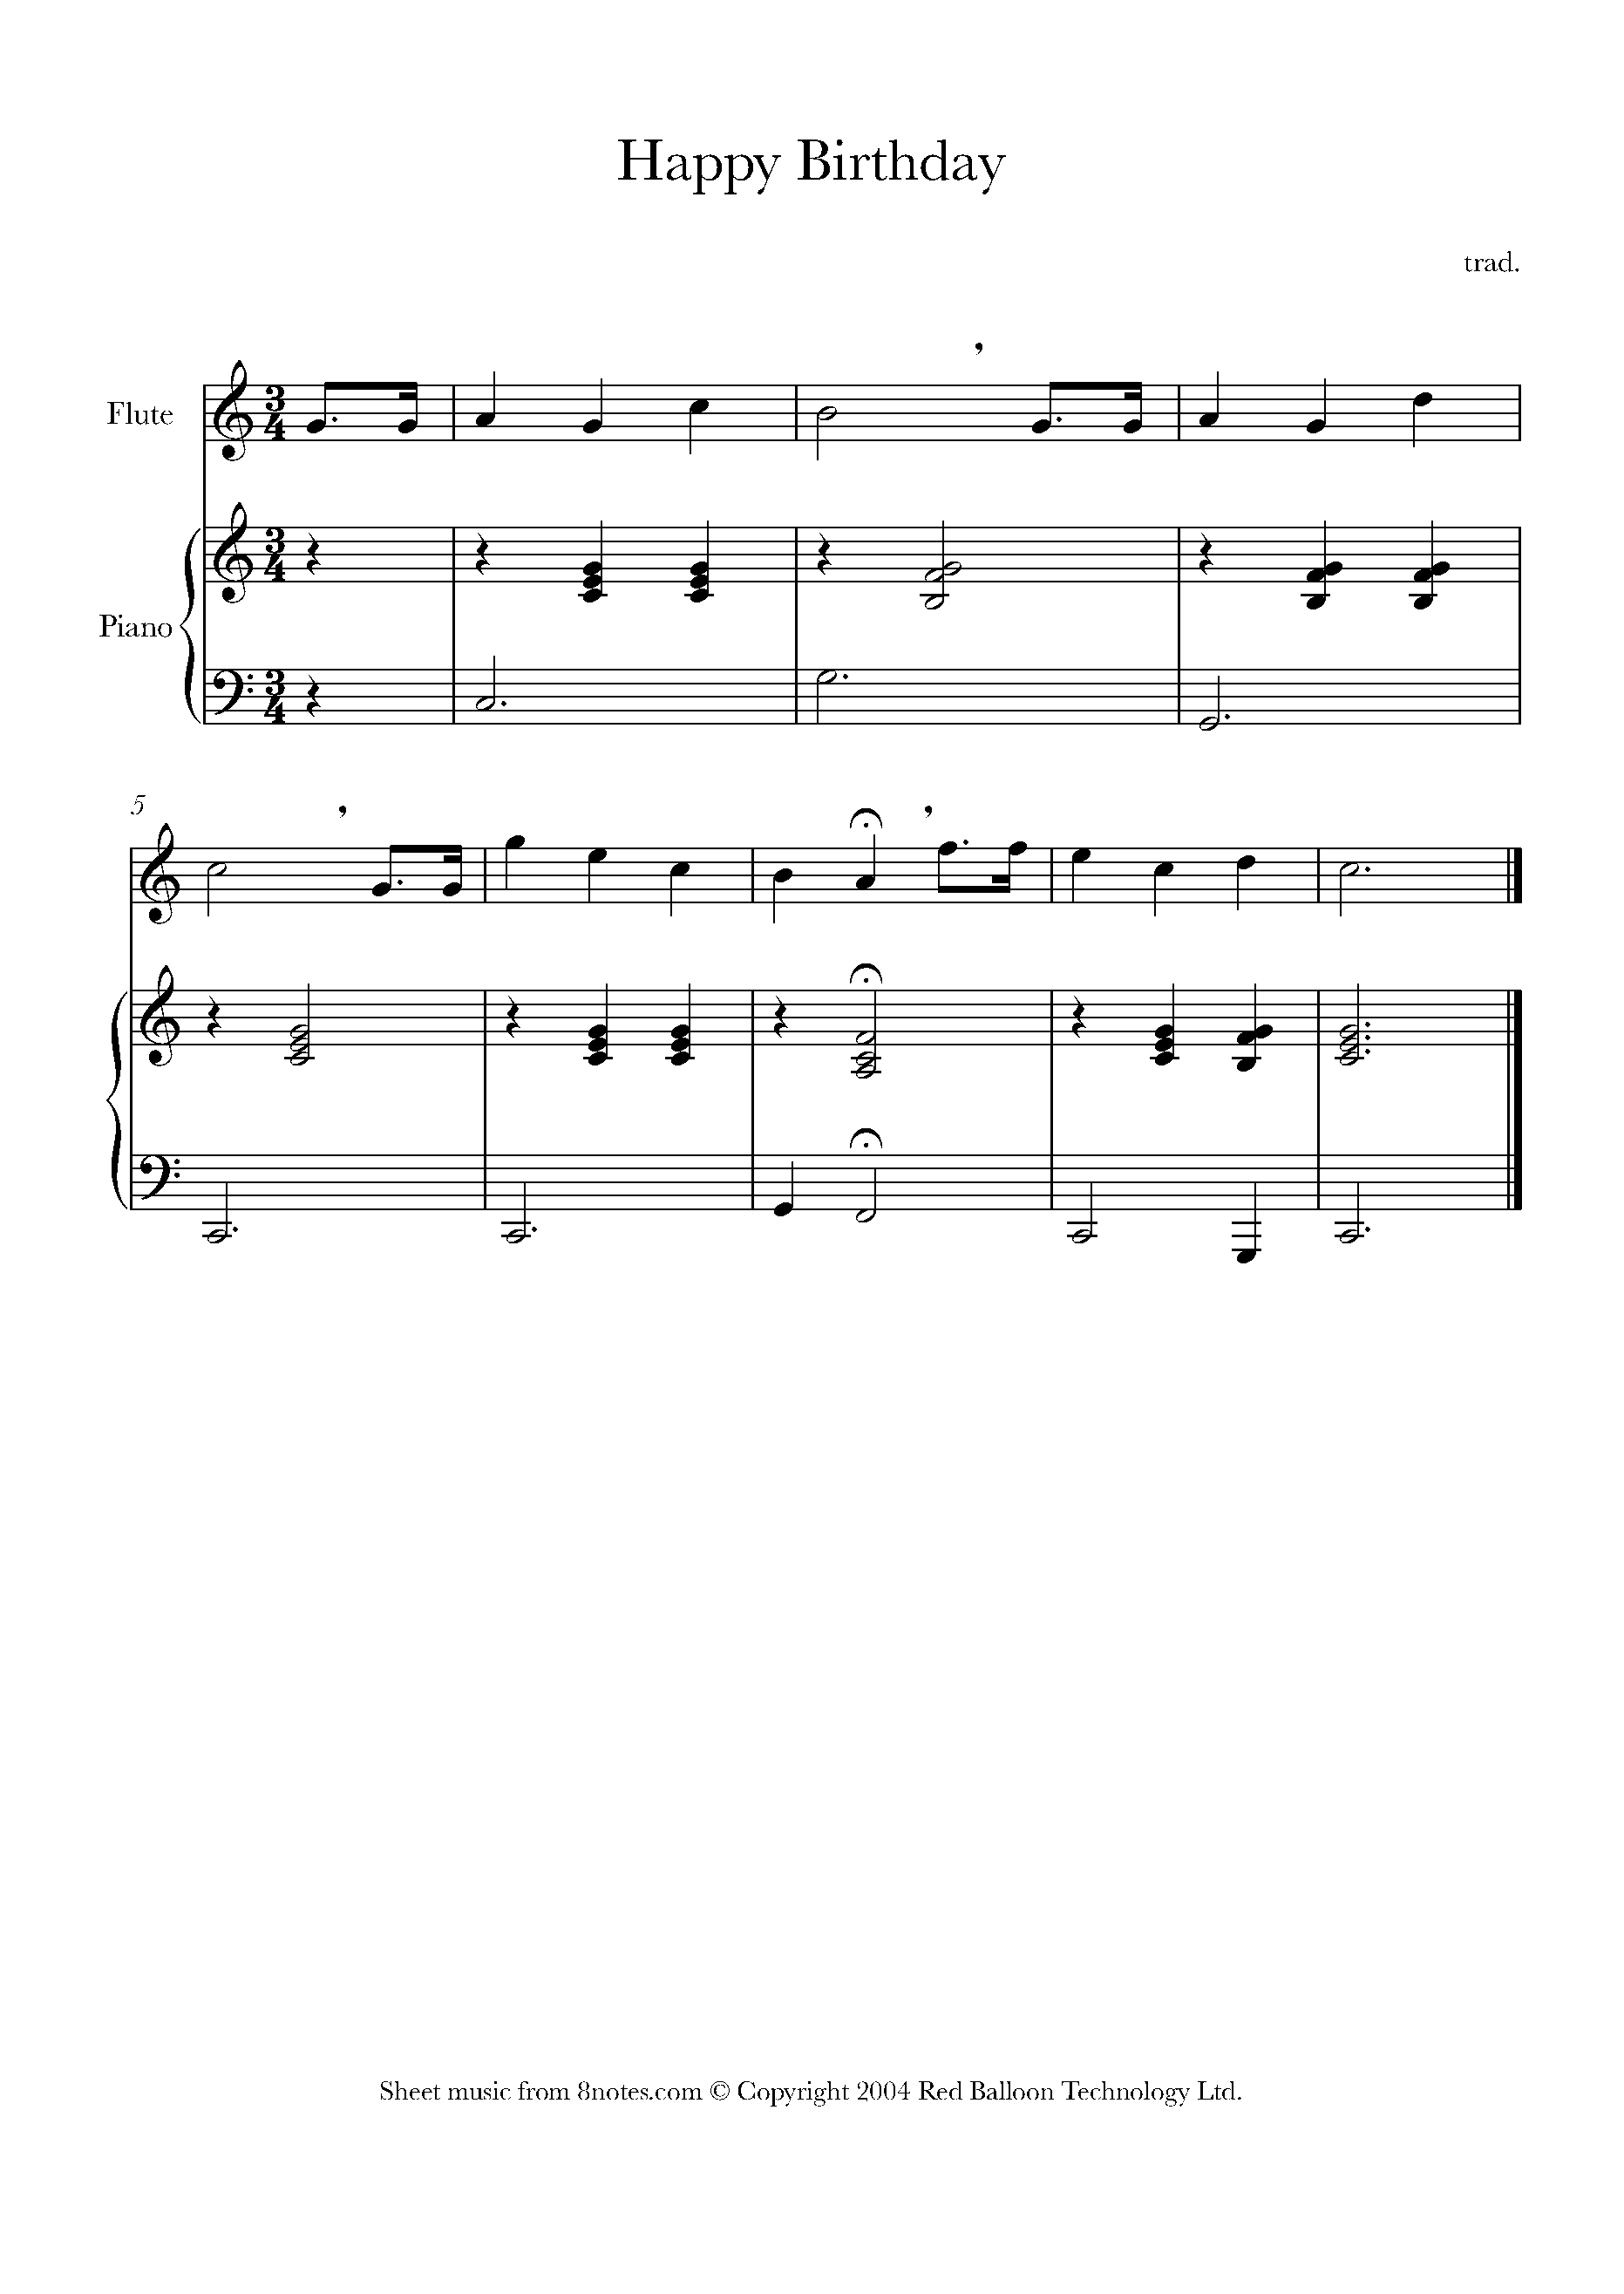 Happy Birthday Sheet music for Flute - 8notes.com